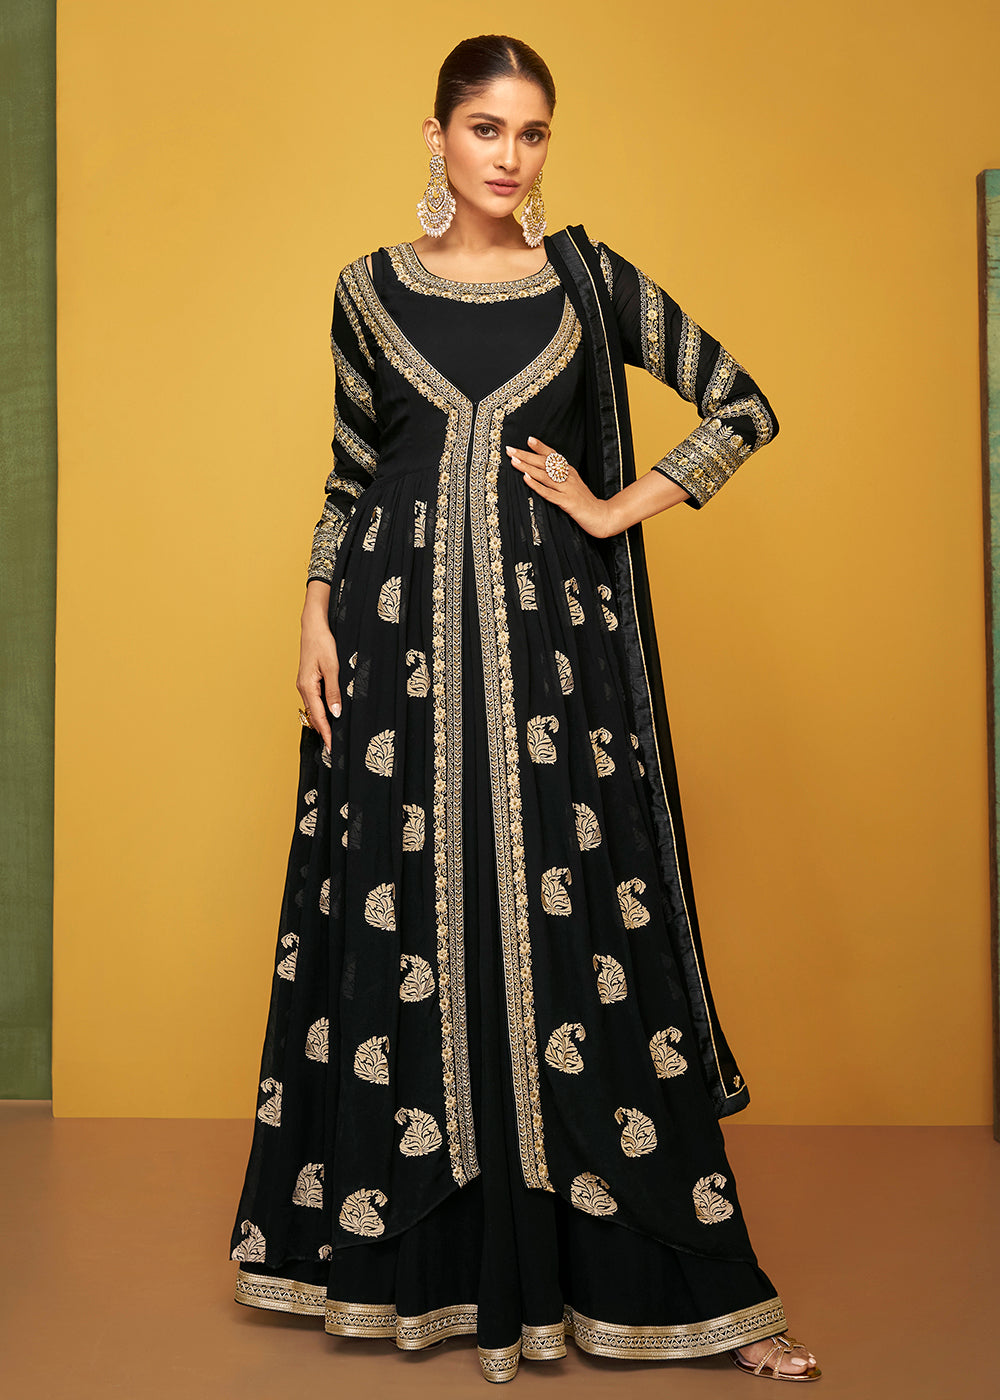 Black Evening Gowns - Buy Black Evening Gowns online at Best Prices in  India | Flipkart.com